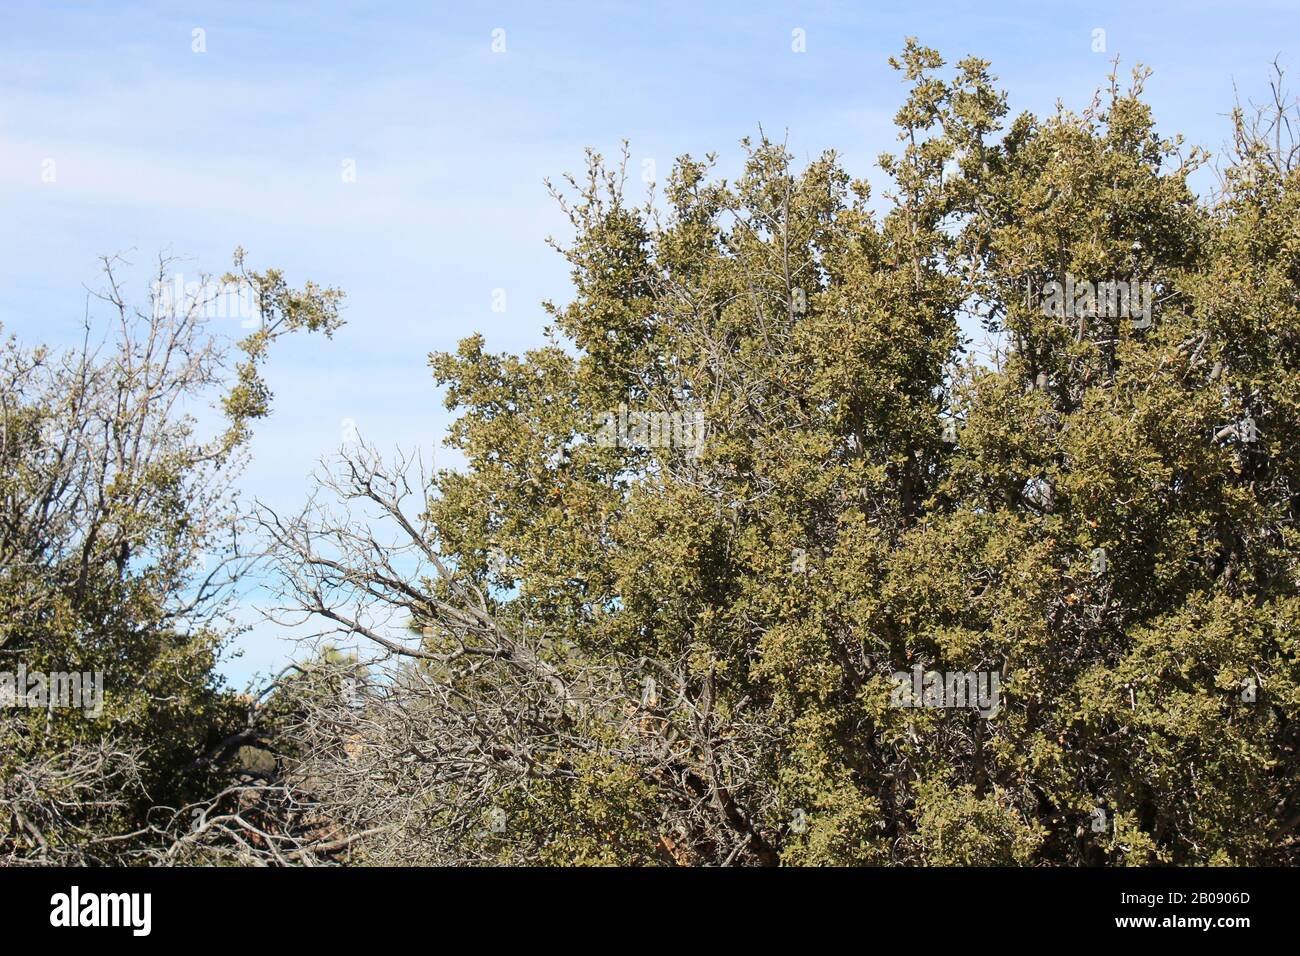 Quercus is a genus of flowering plants in the Botanical Family Fagaceae. Commonly known as the Oaks, Joshua Tree National Park hosts 5 native species. Stock Photo